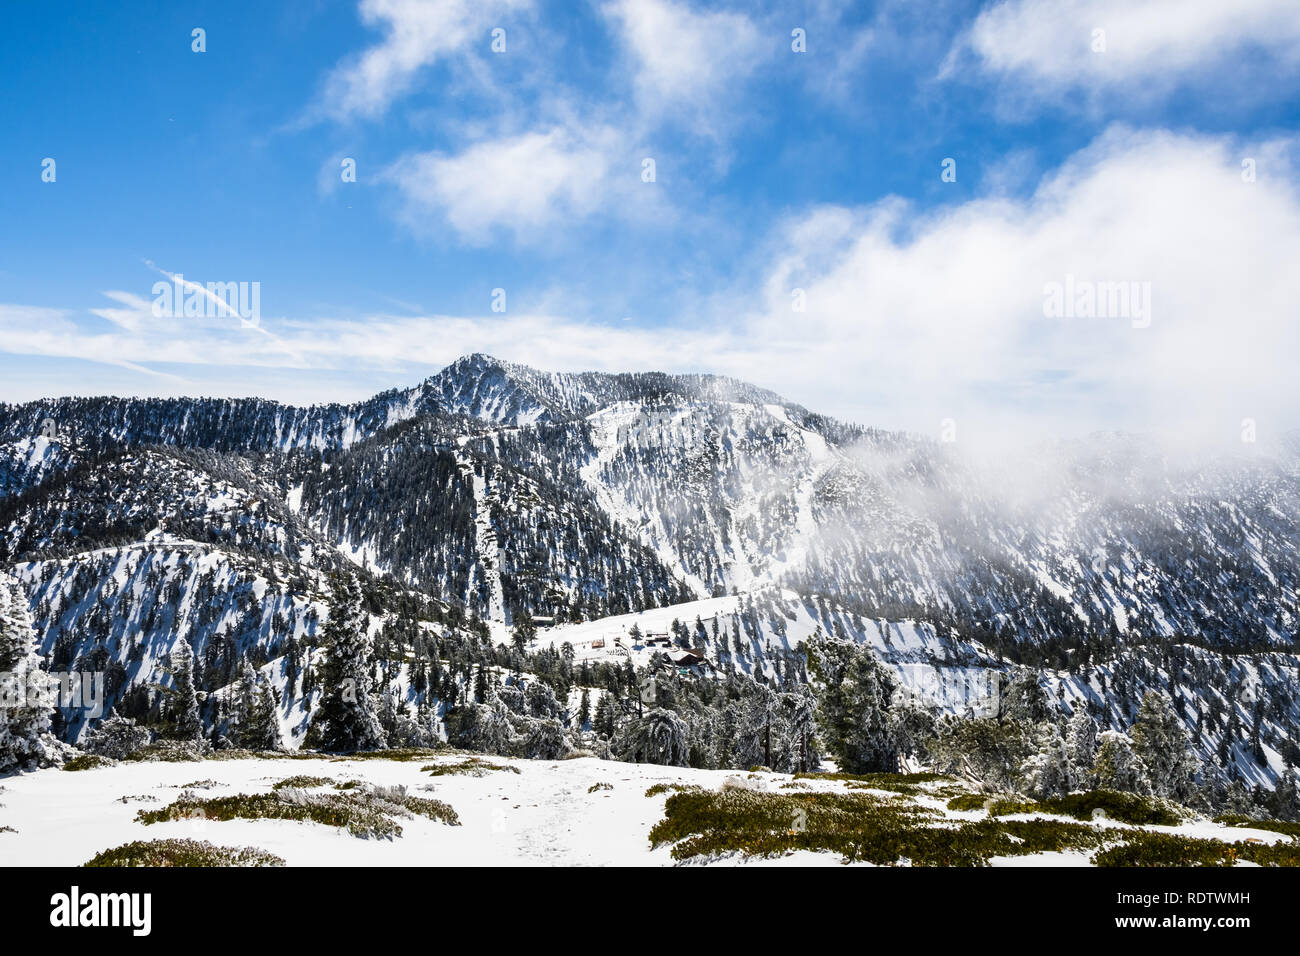 Ski slopes on Mount San Antonio (Mt Baldy), fog rising up from the valley, south California Stock Photo